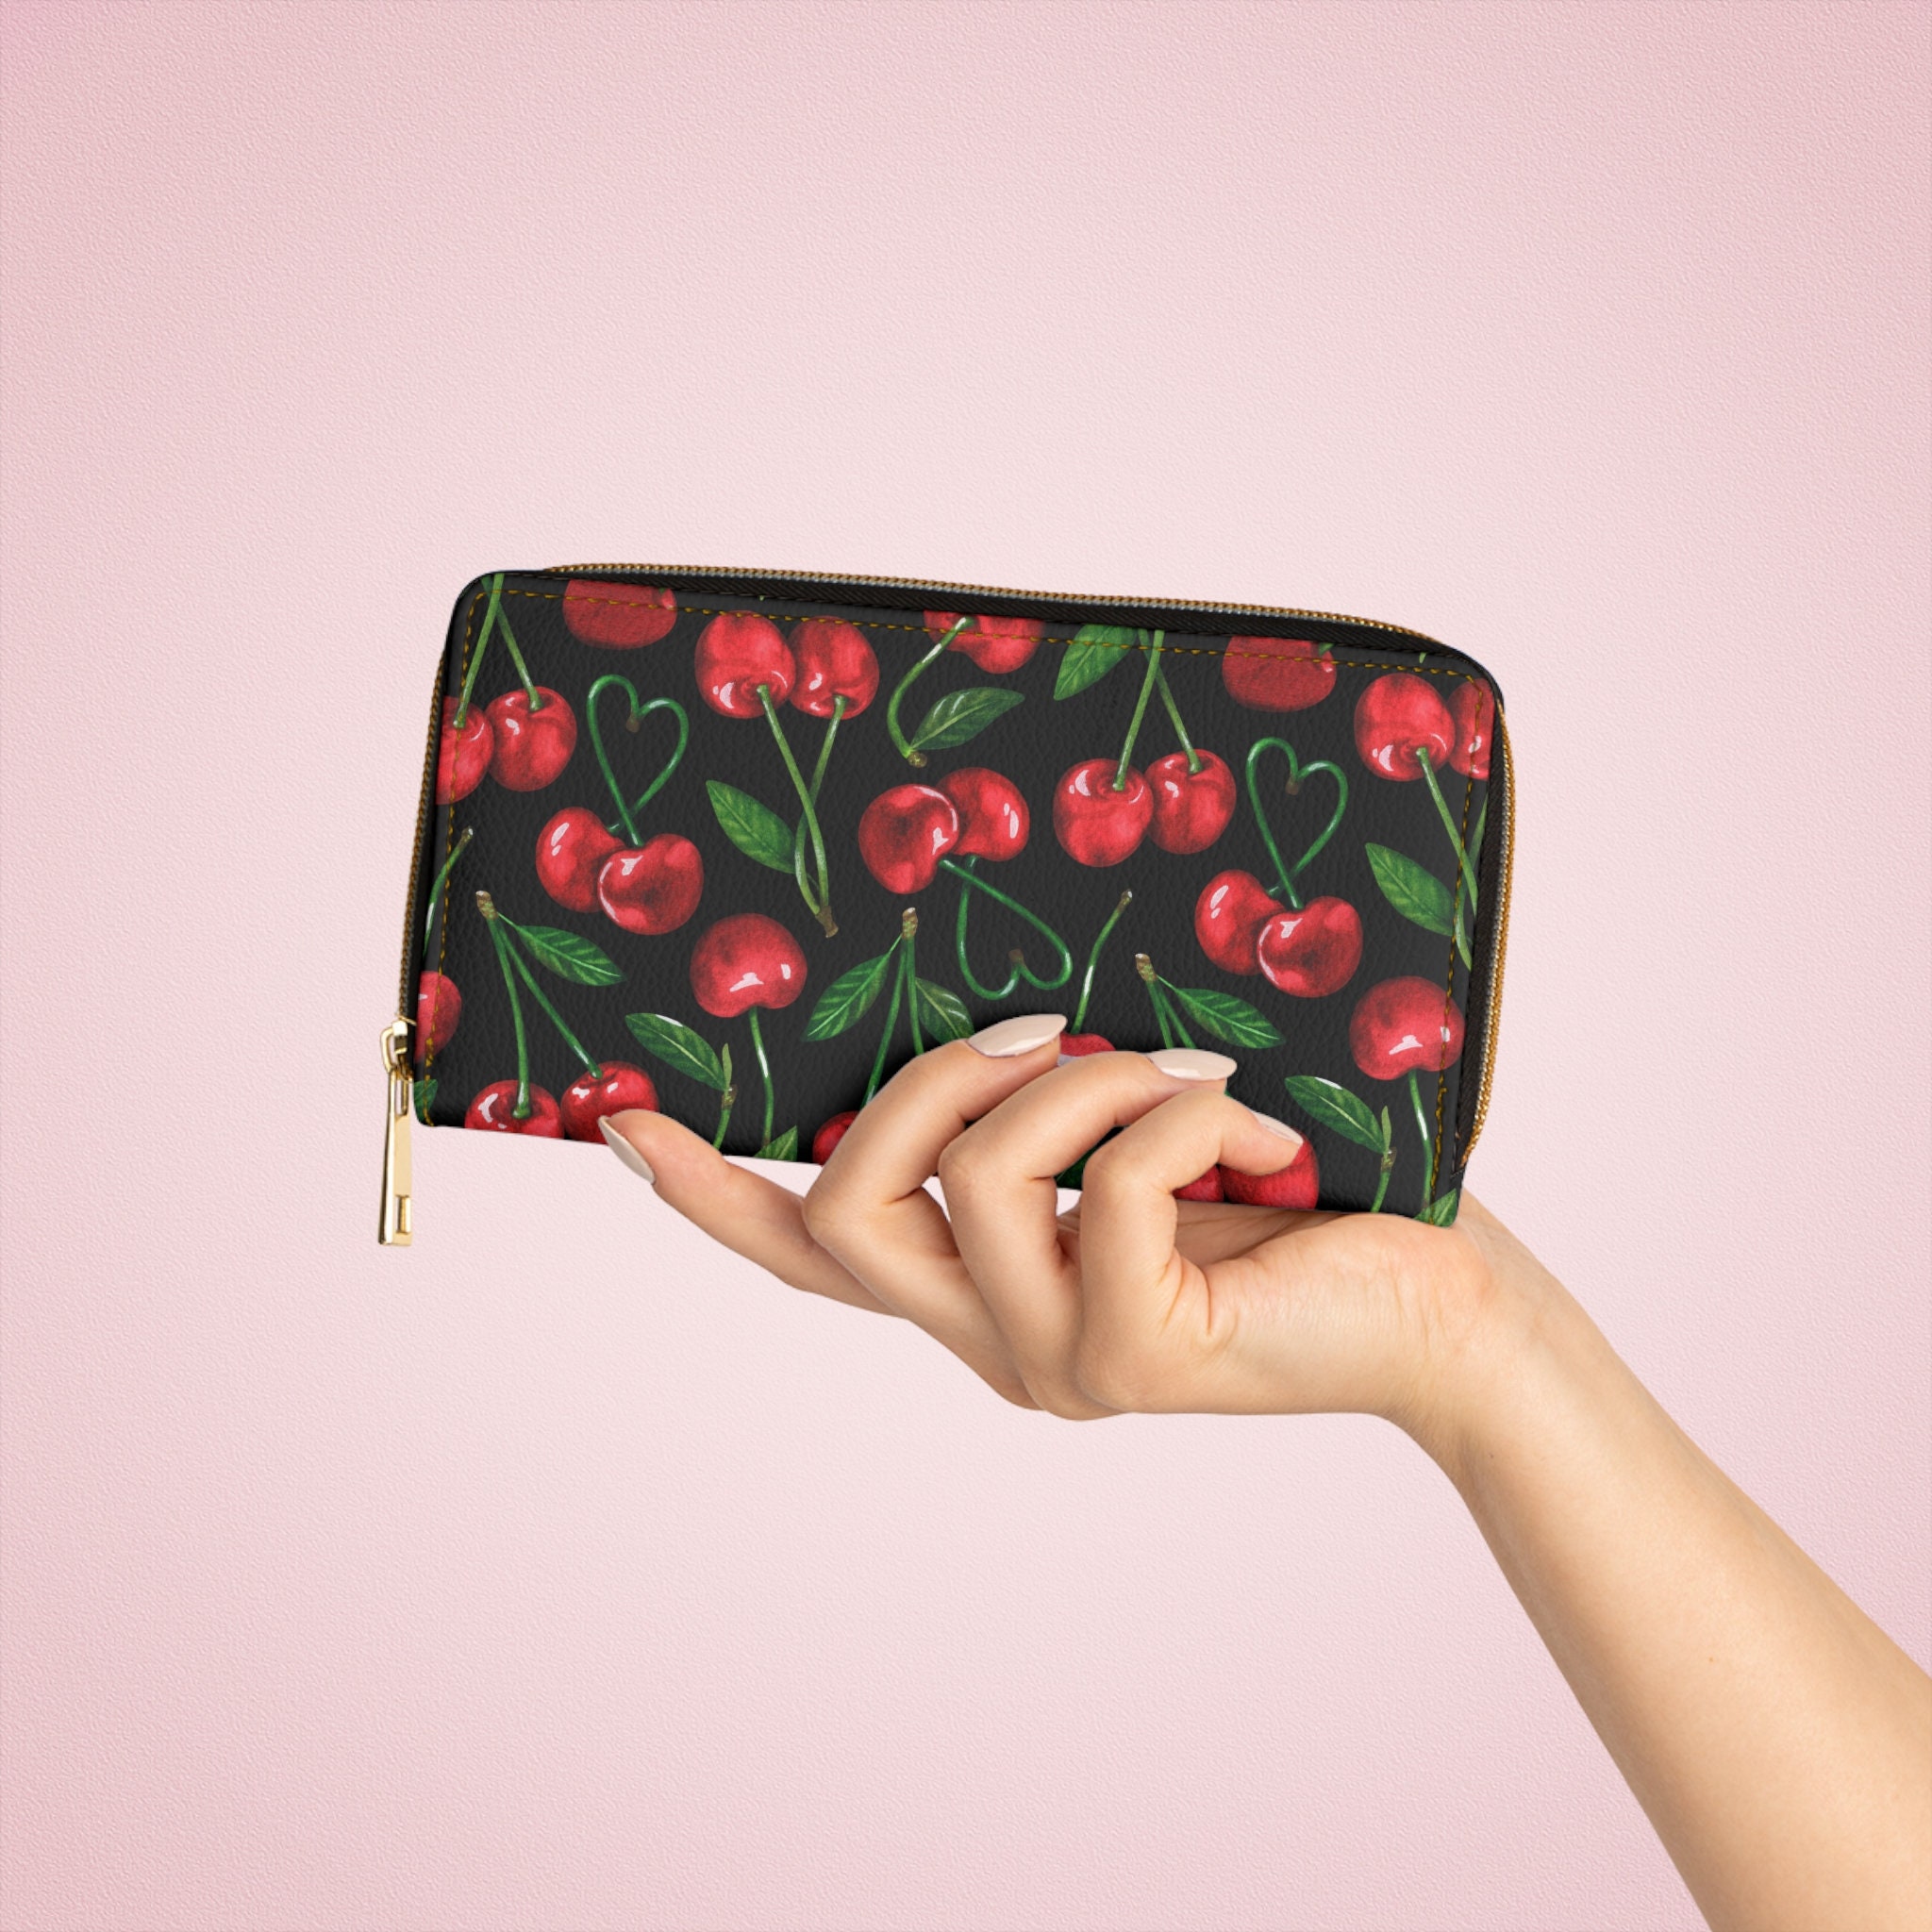 Cathayana RFID Blocking Card Purse - Red Cherry Blossom: Design Quest